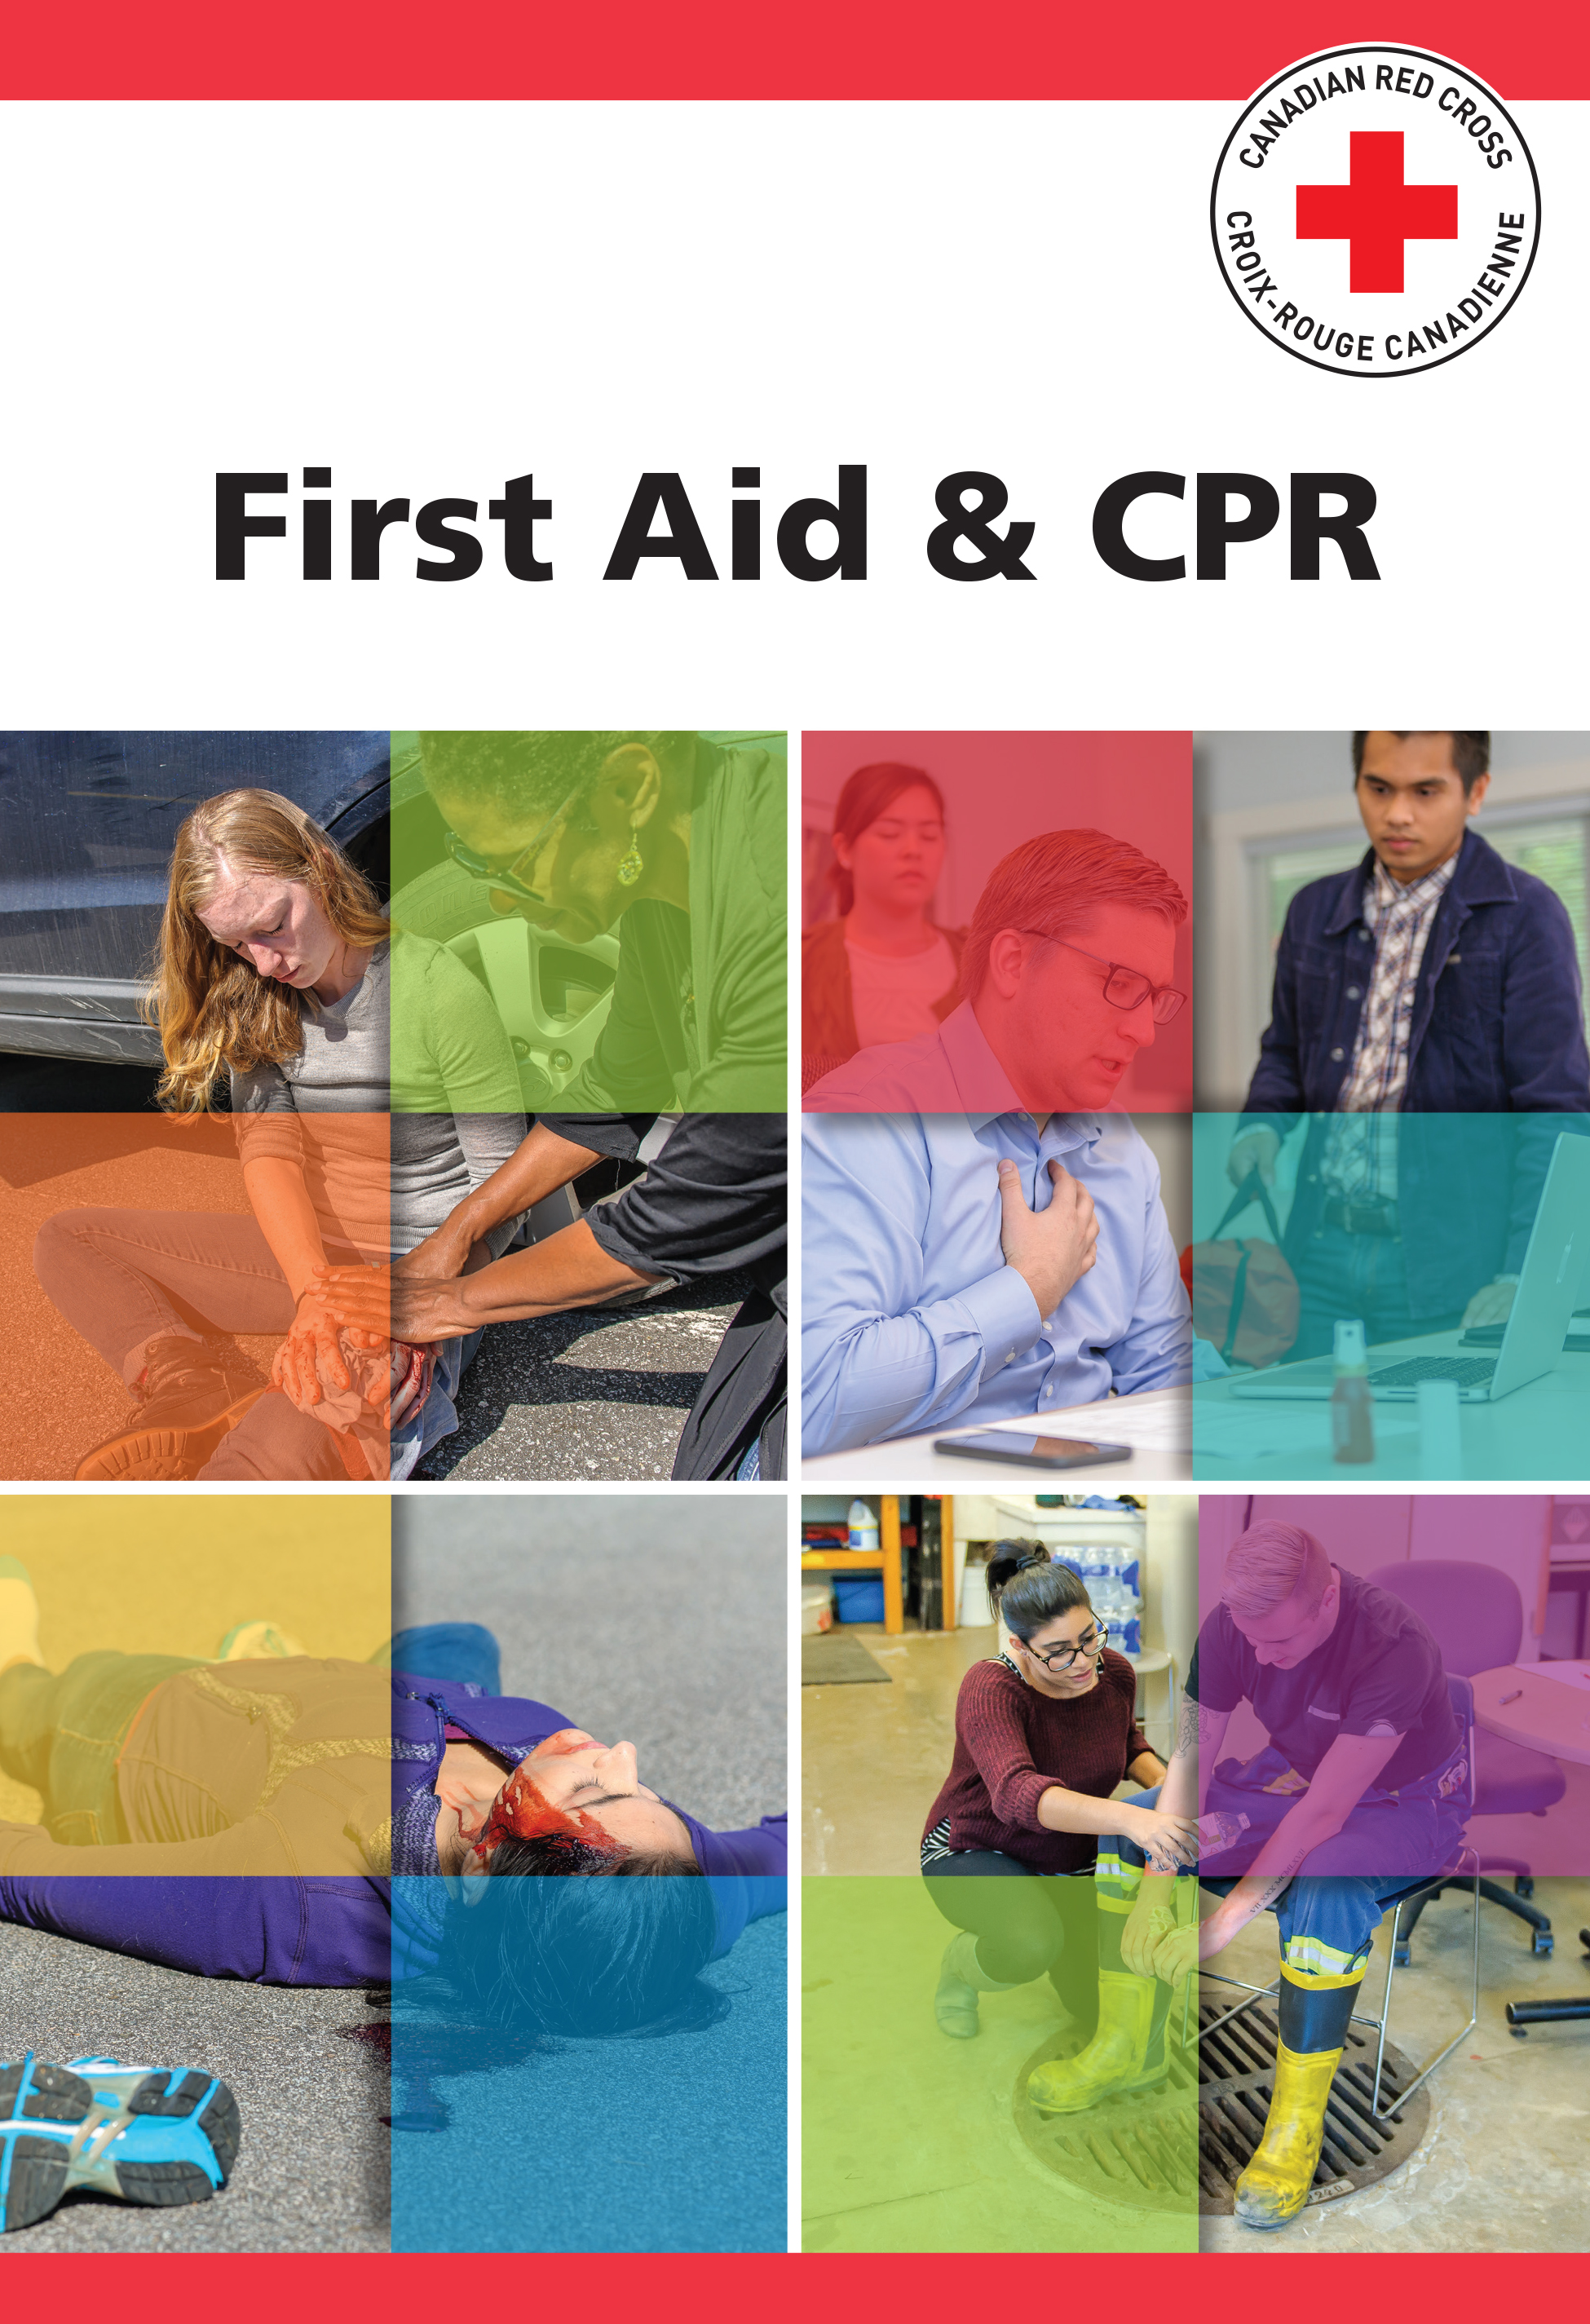 First Aid Course Materials for Marine Basic First Aid and CPR Level C (Blended) in Vancouver